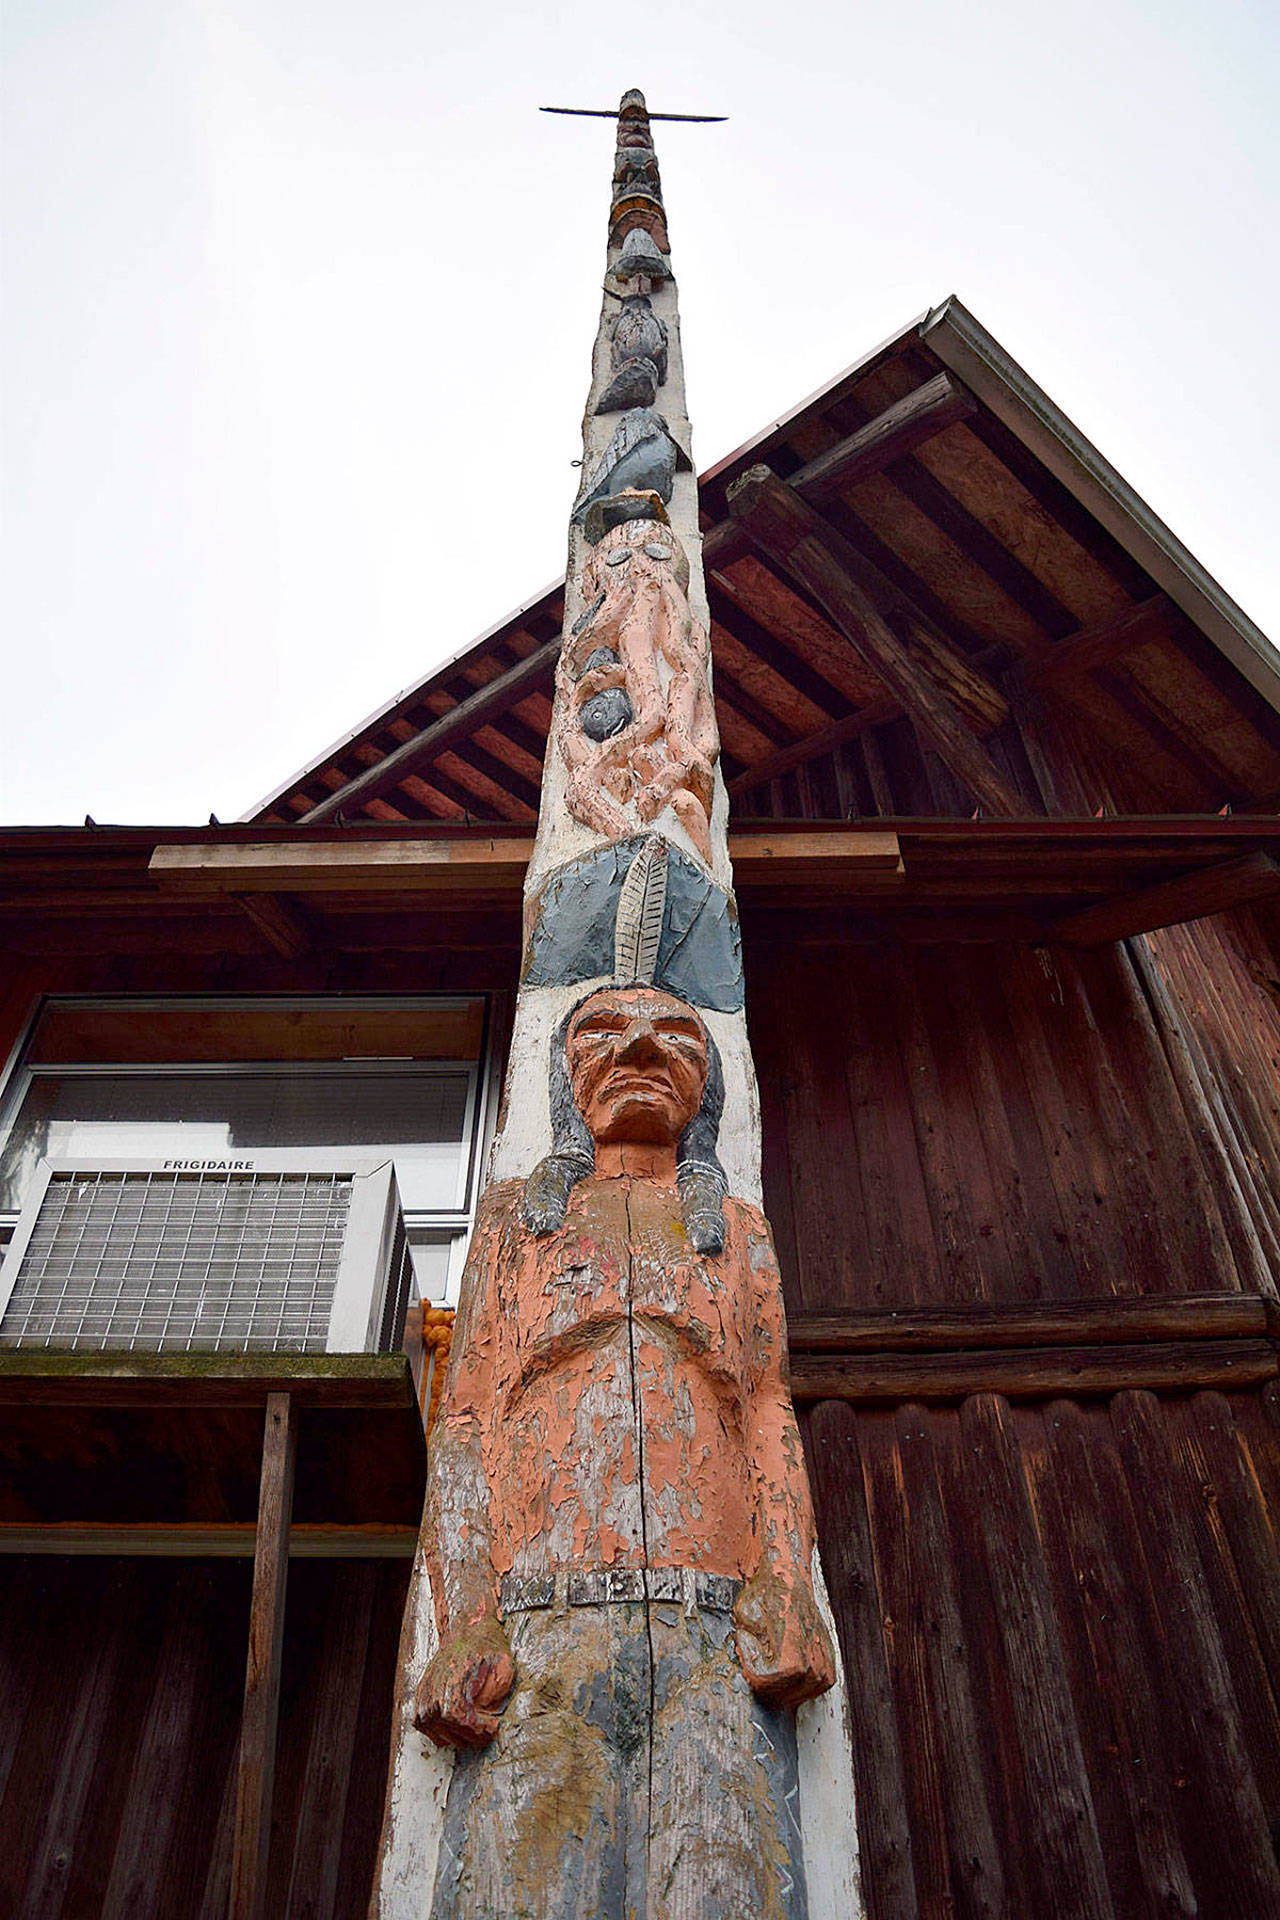 The story pole at Island County Fairgrounds has greeted thousands of visitors for more than 70 years. But who carved it and how and when it ended up at the fair is a mystery that the South Whidbey Historical Society is trying to solve. File photo